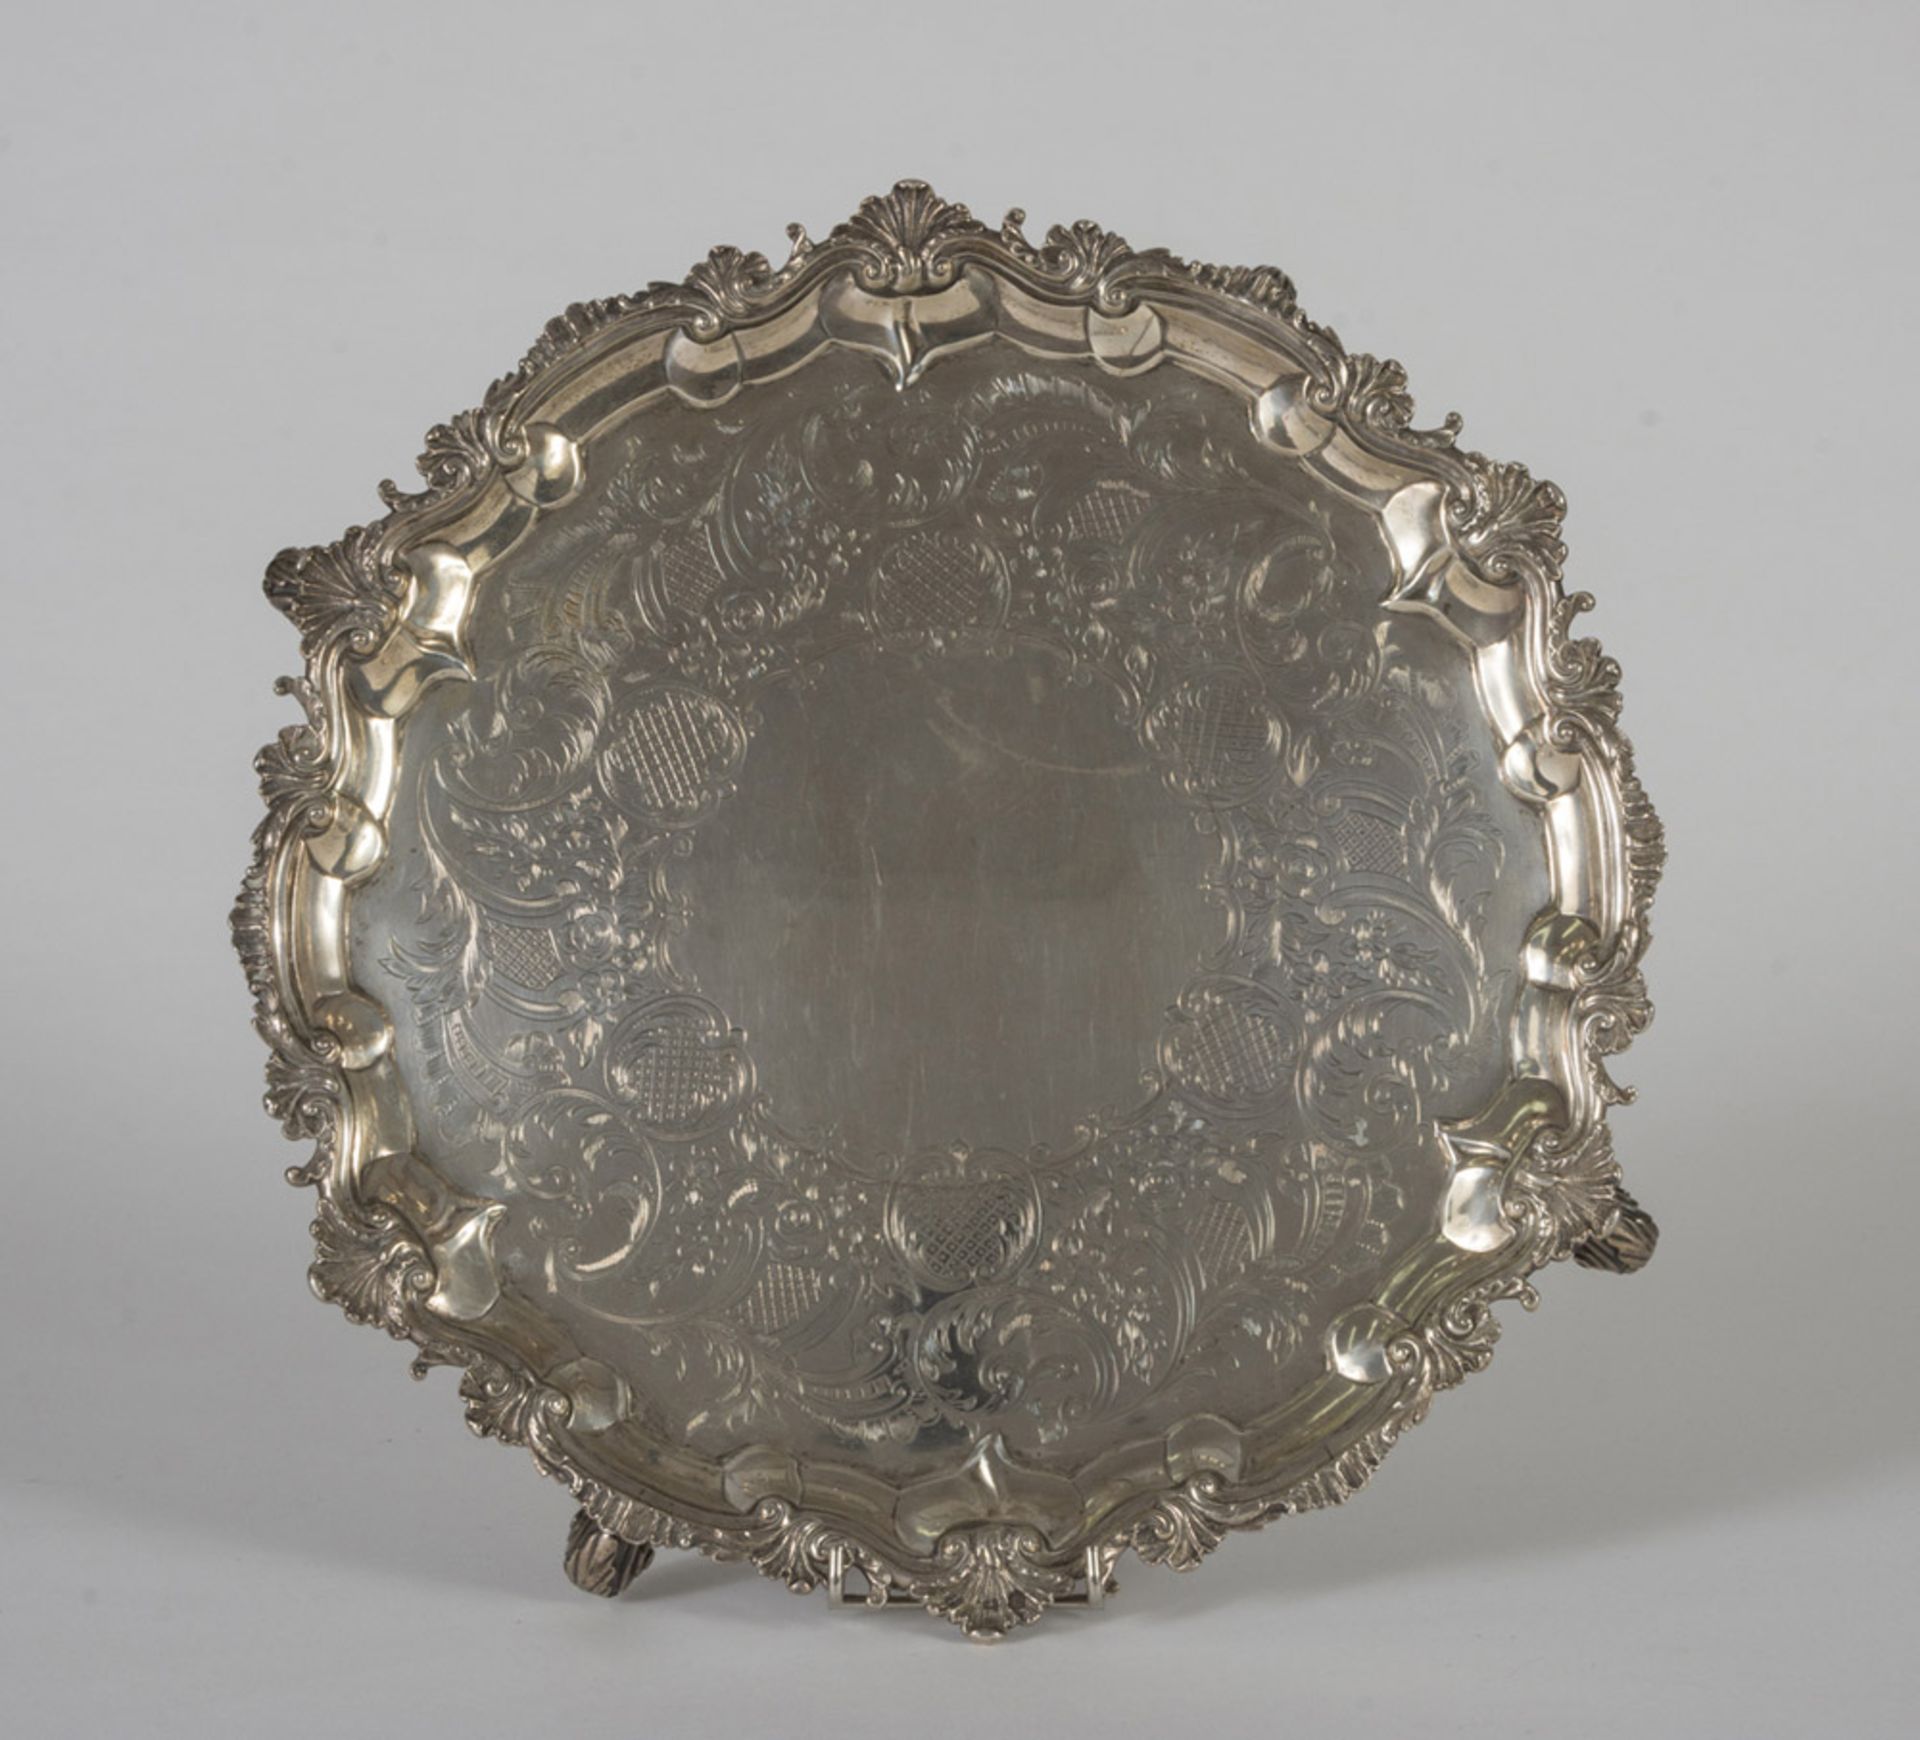 SILVER TRAY, PUNCH LONDON 1787